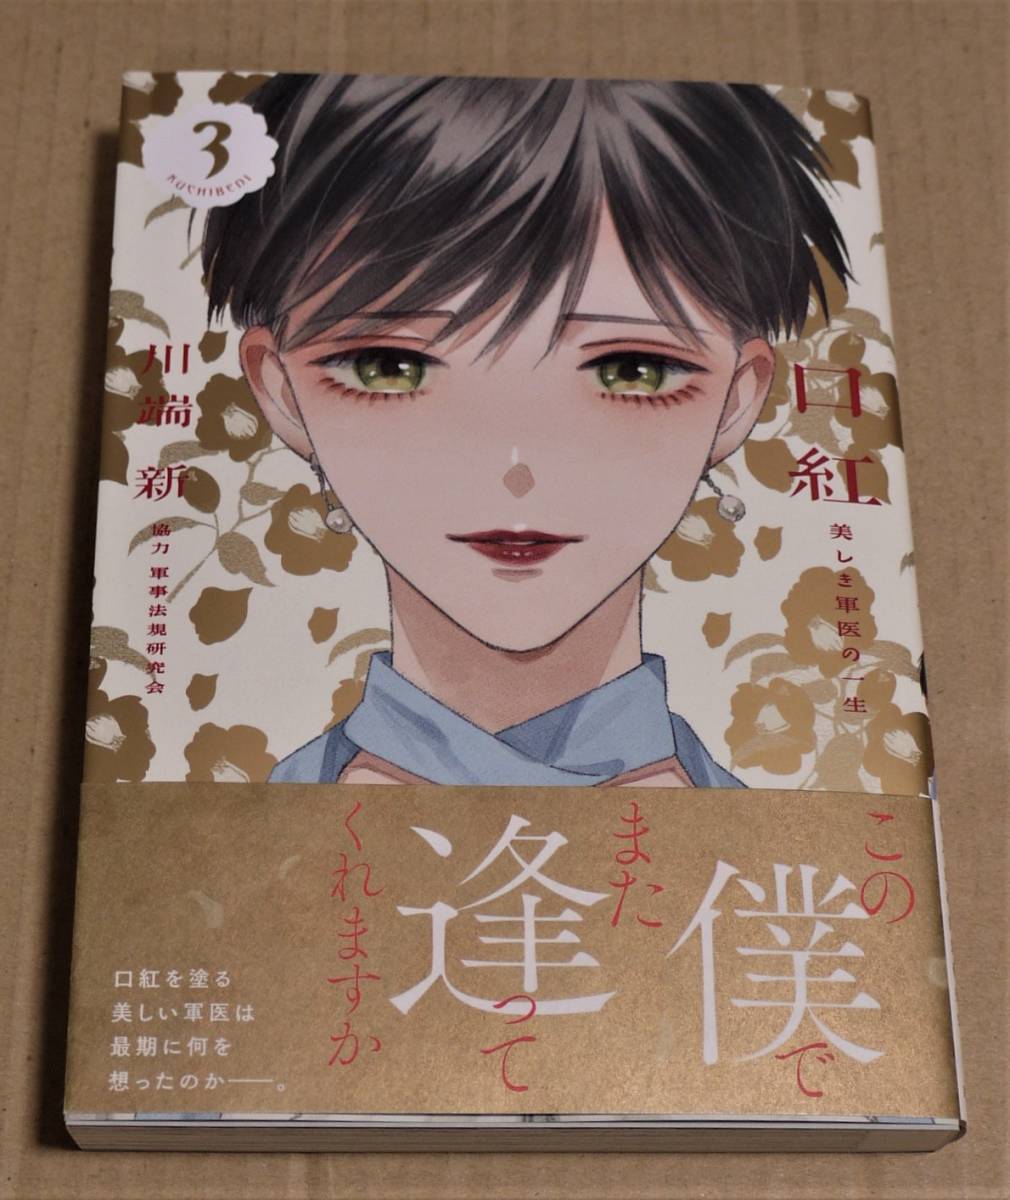 Lipstick: The Beautiful Life of a Military Doctor Volume 3 (Kawabata Shin) with hand-drawn illustrations and autograph, Click Post shipping included, Comics, Anime Goods, sign, Autograph